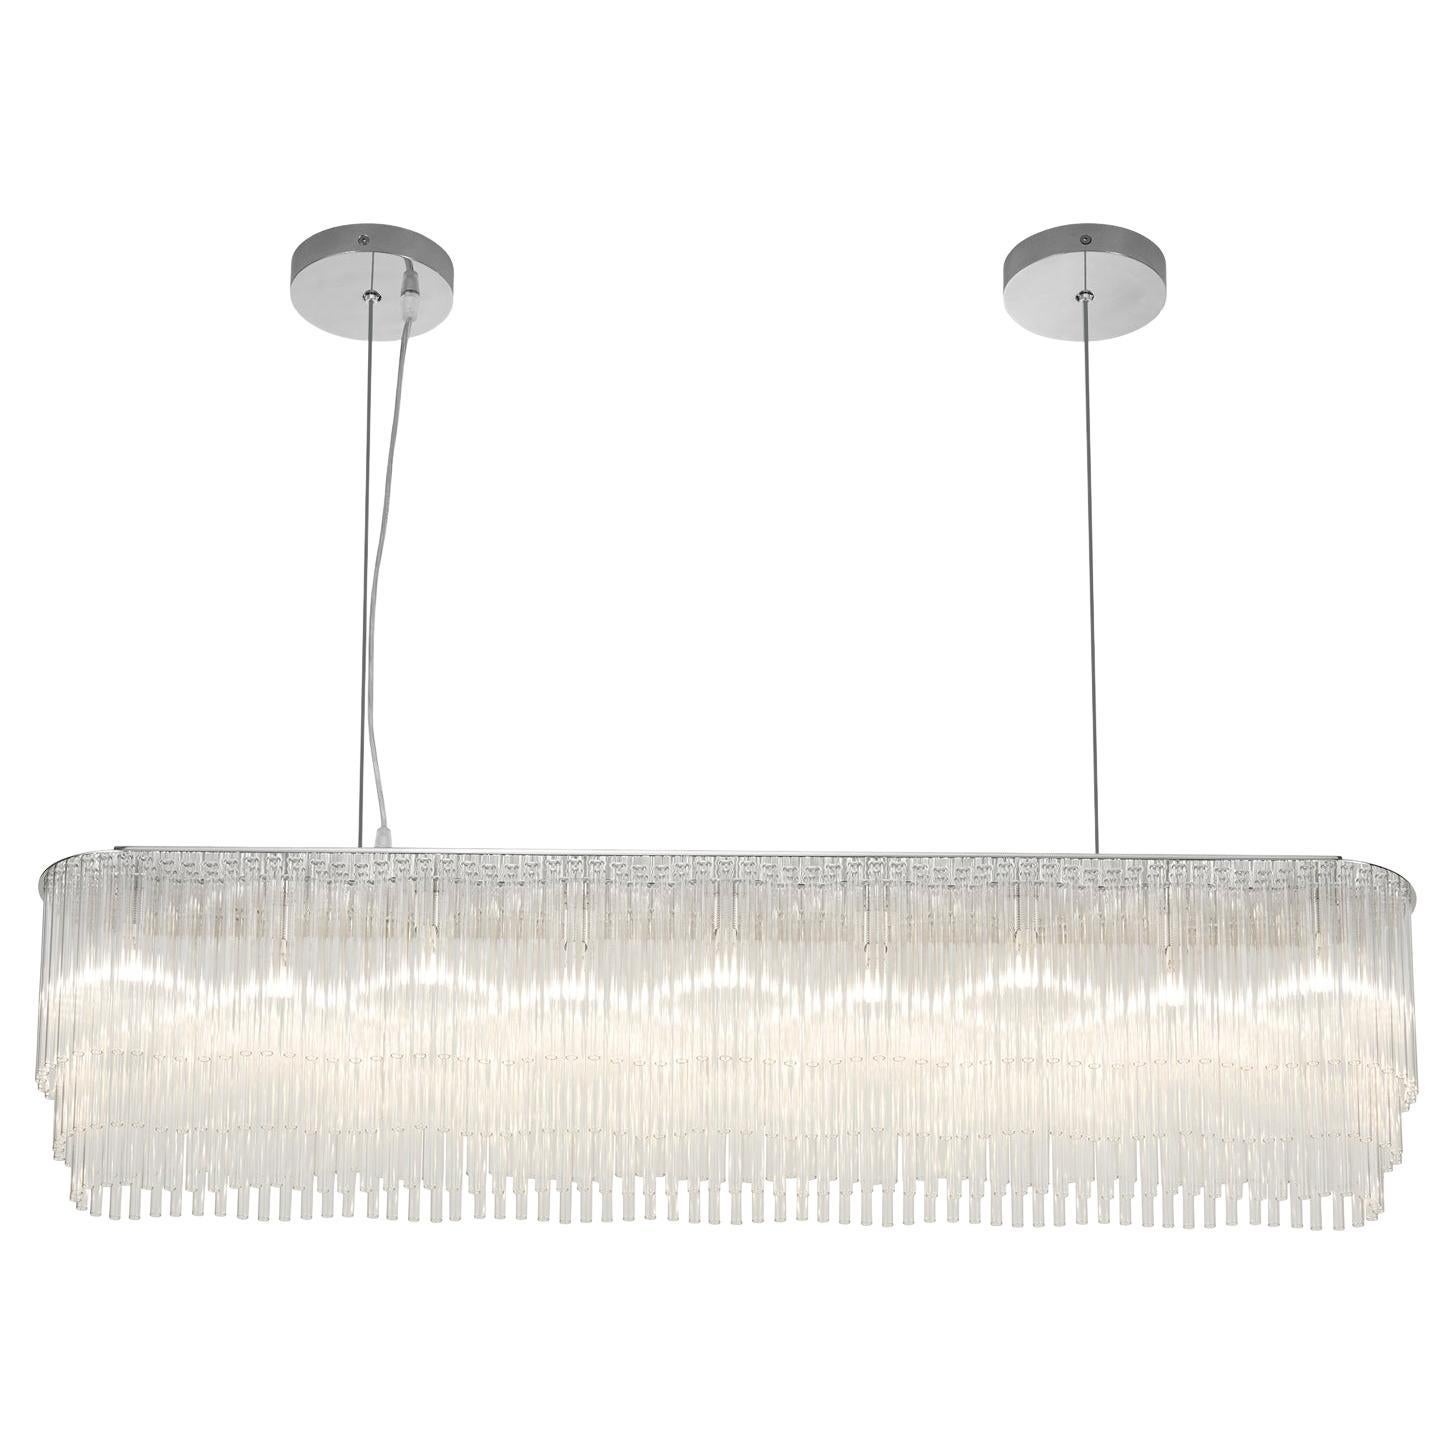 Linear Chandelier Thin 1445mm/58.75" in Polished Nickel / Tiered Glass Profile For Sale